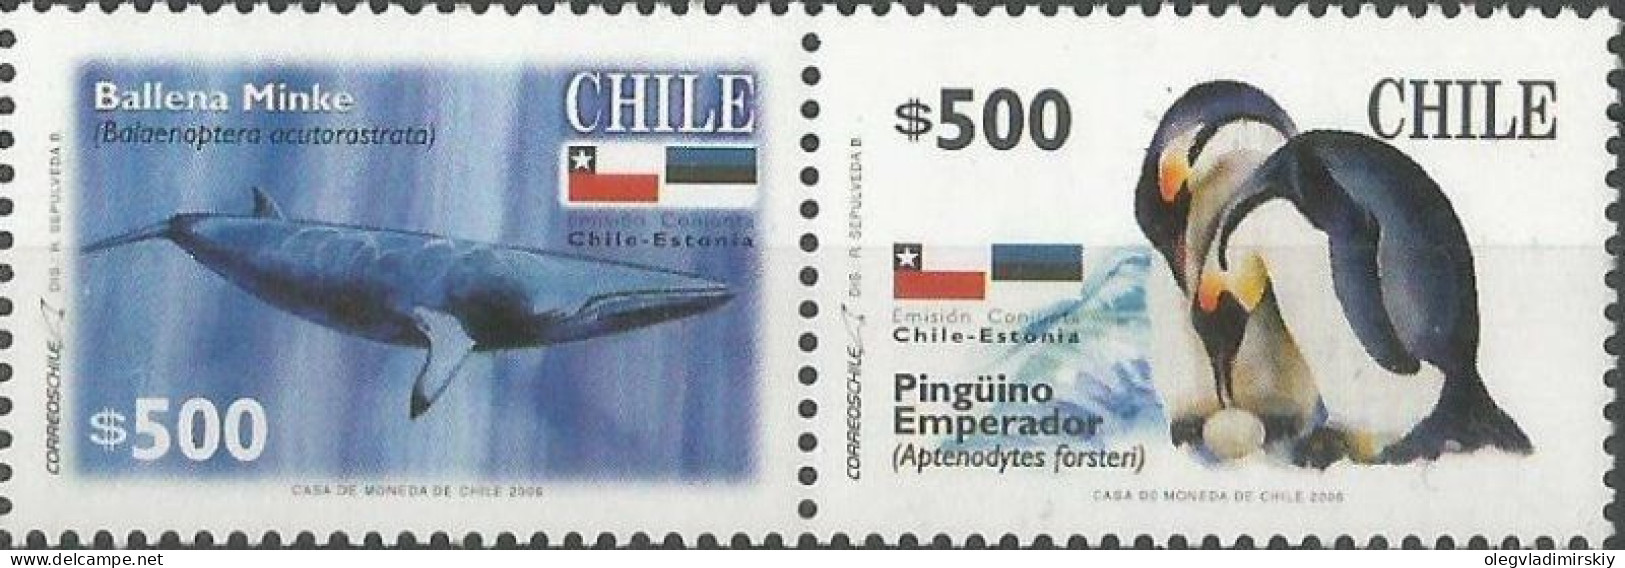 Chile Chili 2006 Antarctic Fauna Penguin Whale Joint With Estonia Strip Of 2 Stamps MNH - Wale